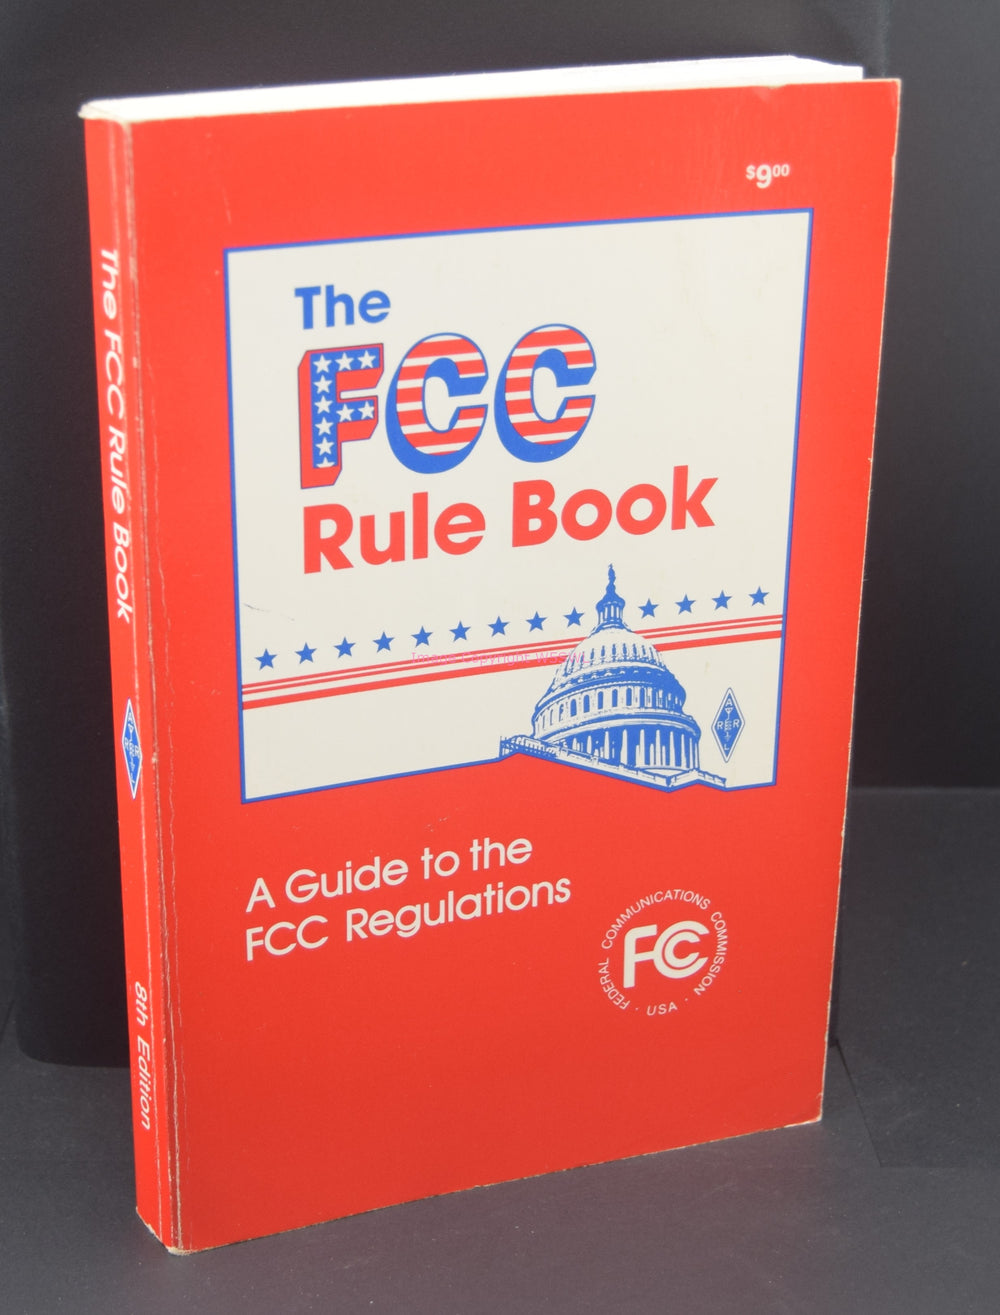 The FCC Rule Book - A Guide to the FCC Regulations 8th Edition - Dave's Hobby Shop by W5SWL